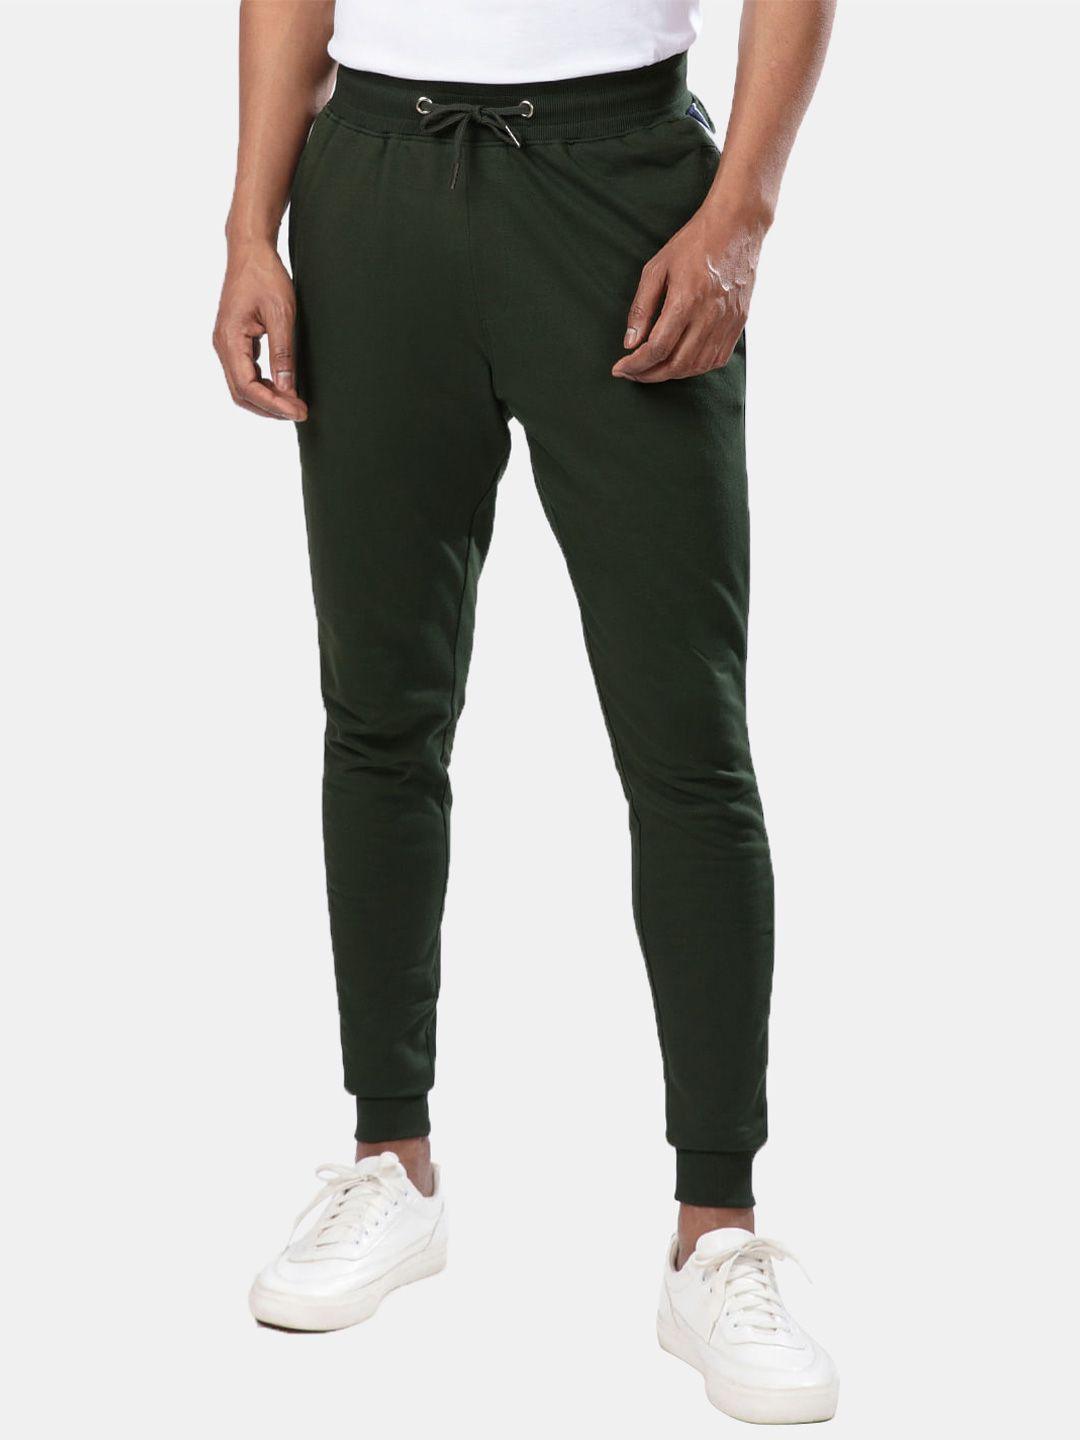 the-souled-store-men-olive-green-solid-cotton-joggers